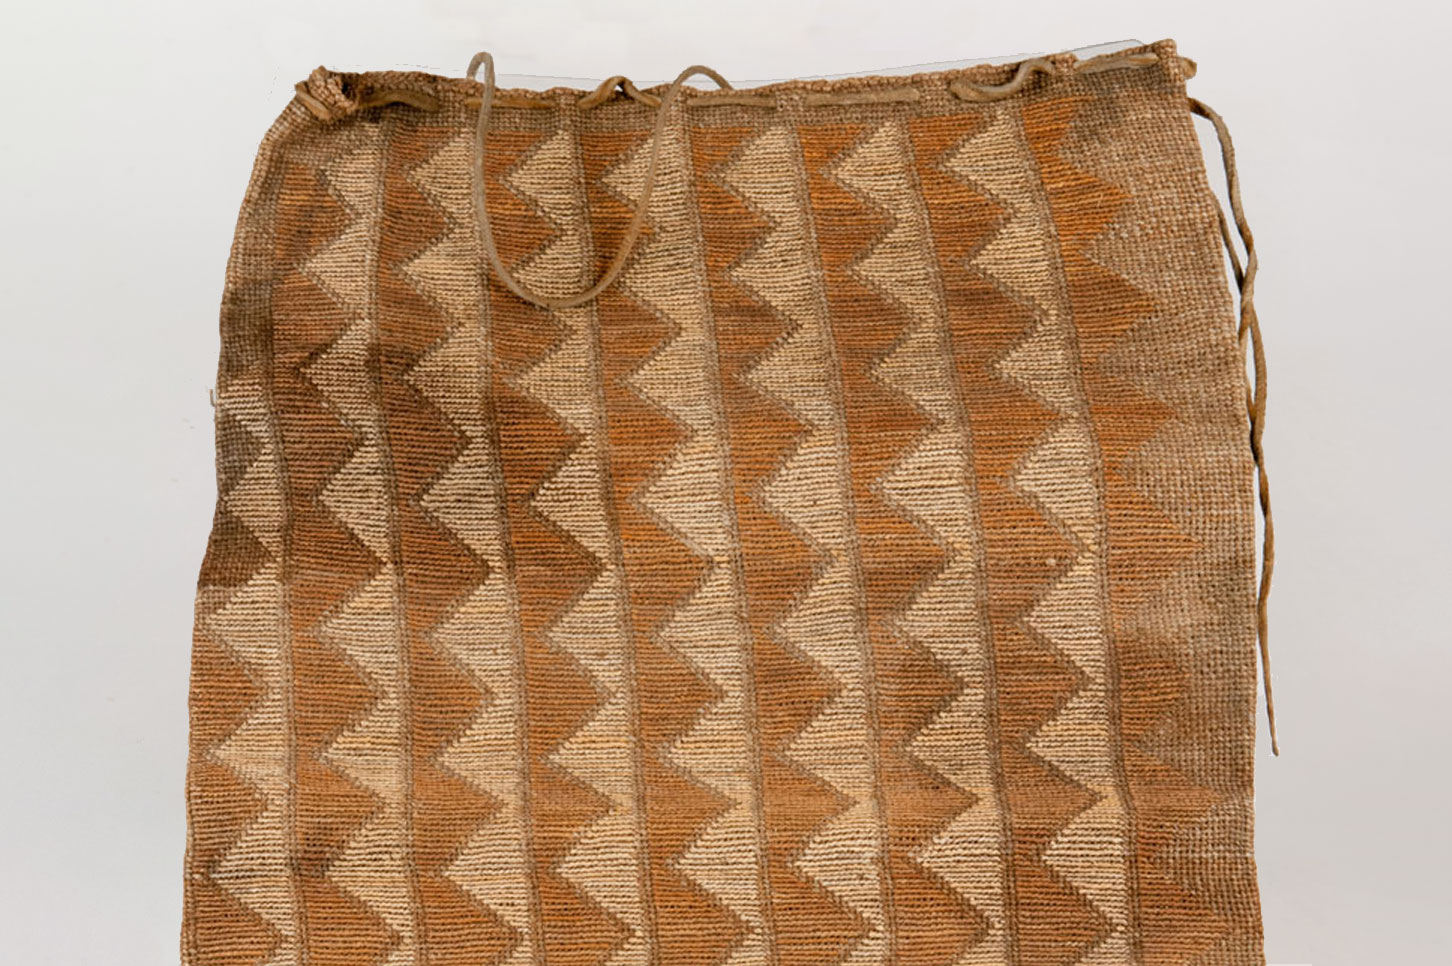 Large, flat cornhusk bag with a buckskin drawstring attached to the top of bag. Constructed using plain twining of Indian hemp with cornhusk false embroidery and dyed beargrass.